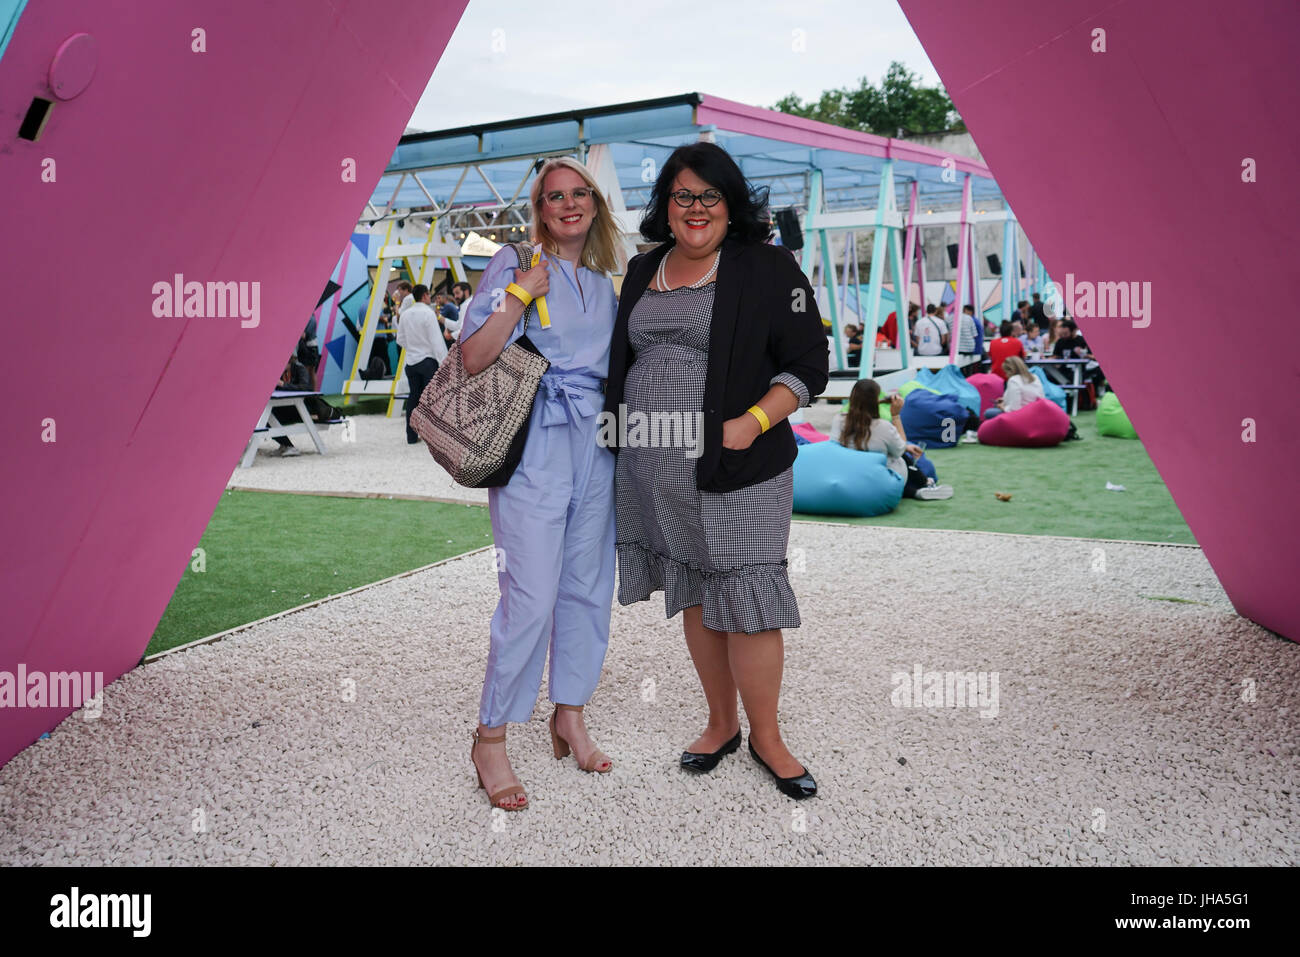 PITCH Stratford, London, England, UK. 13th Jun, 2017. London night tsar, Amy Lame attend the private Pitch Open Airs Cinema. The unique new space is a design-led open-air cinema, drinking terrace and street food venue set to revolutionise the nightlife scene in Stratford on the 13th July 2017. The venue will accommodate 400 sun-worshippers beneath its 80's/90's inspired canopy, which features break-out areas including retro pyramid booths and an outdoor cinema screen. Credit: See Li/Alamy Live News Stock Photo